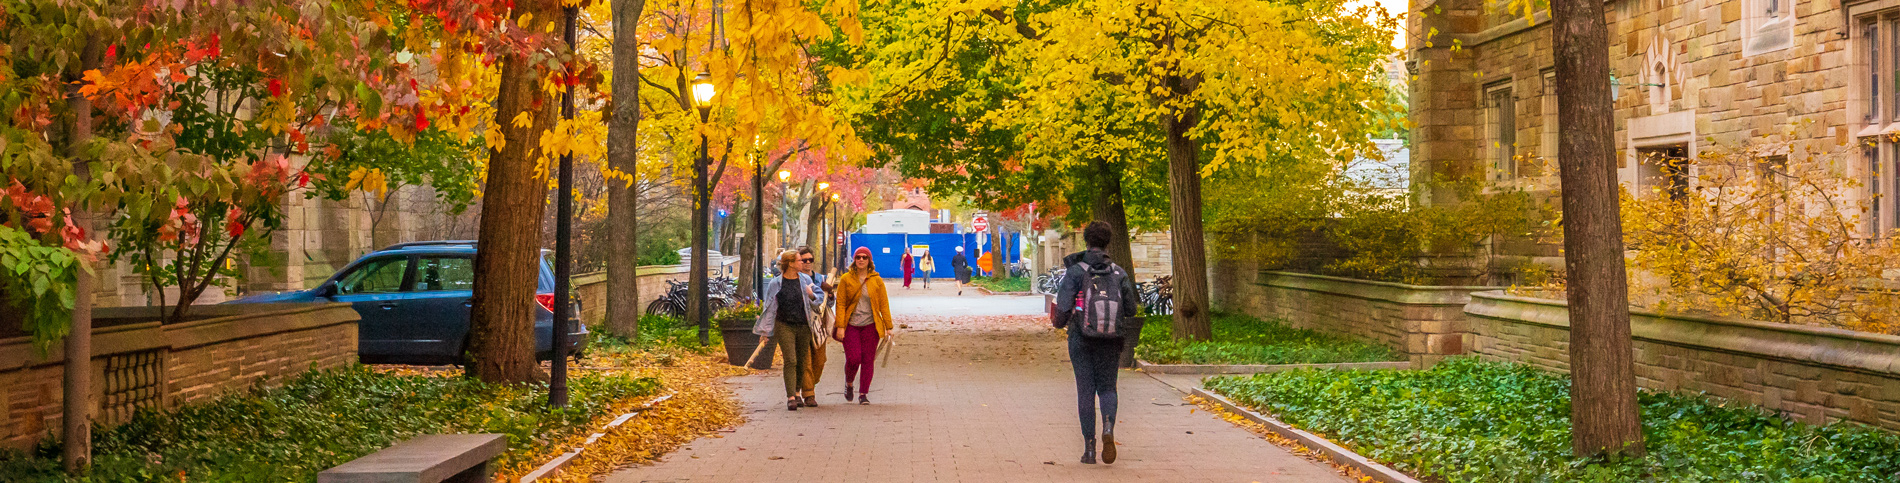 Students walking along a college path with autumn leaves all around